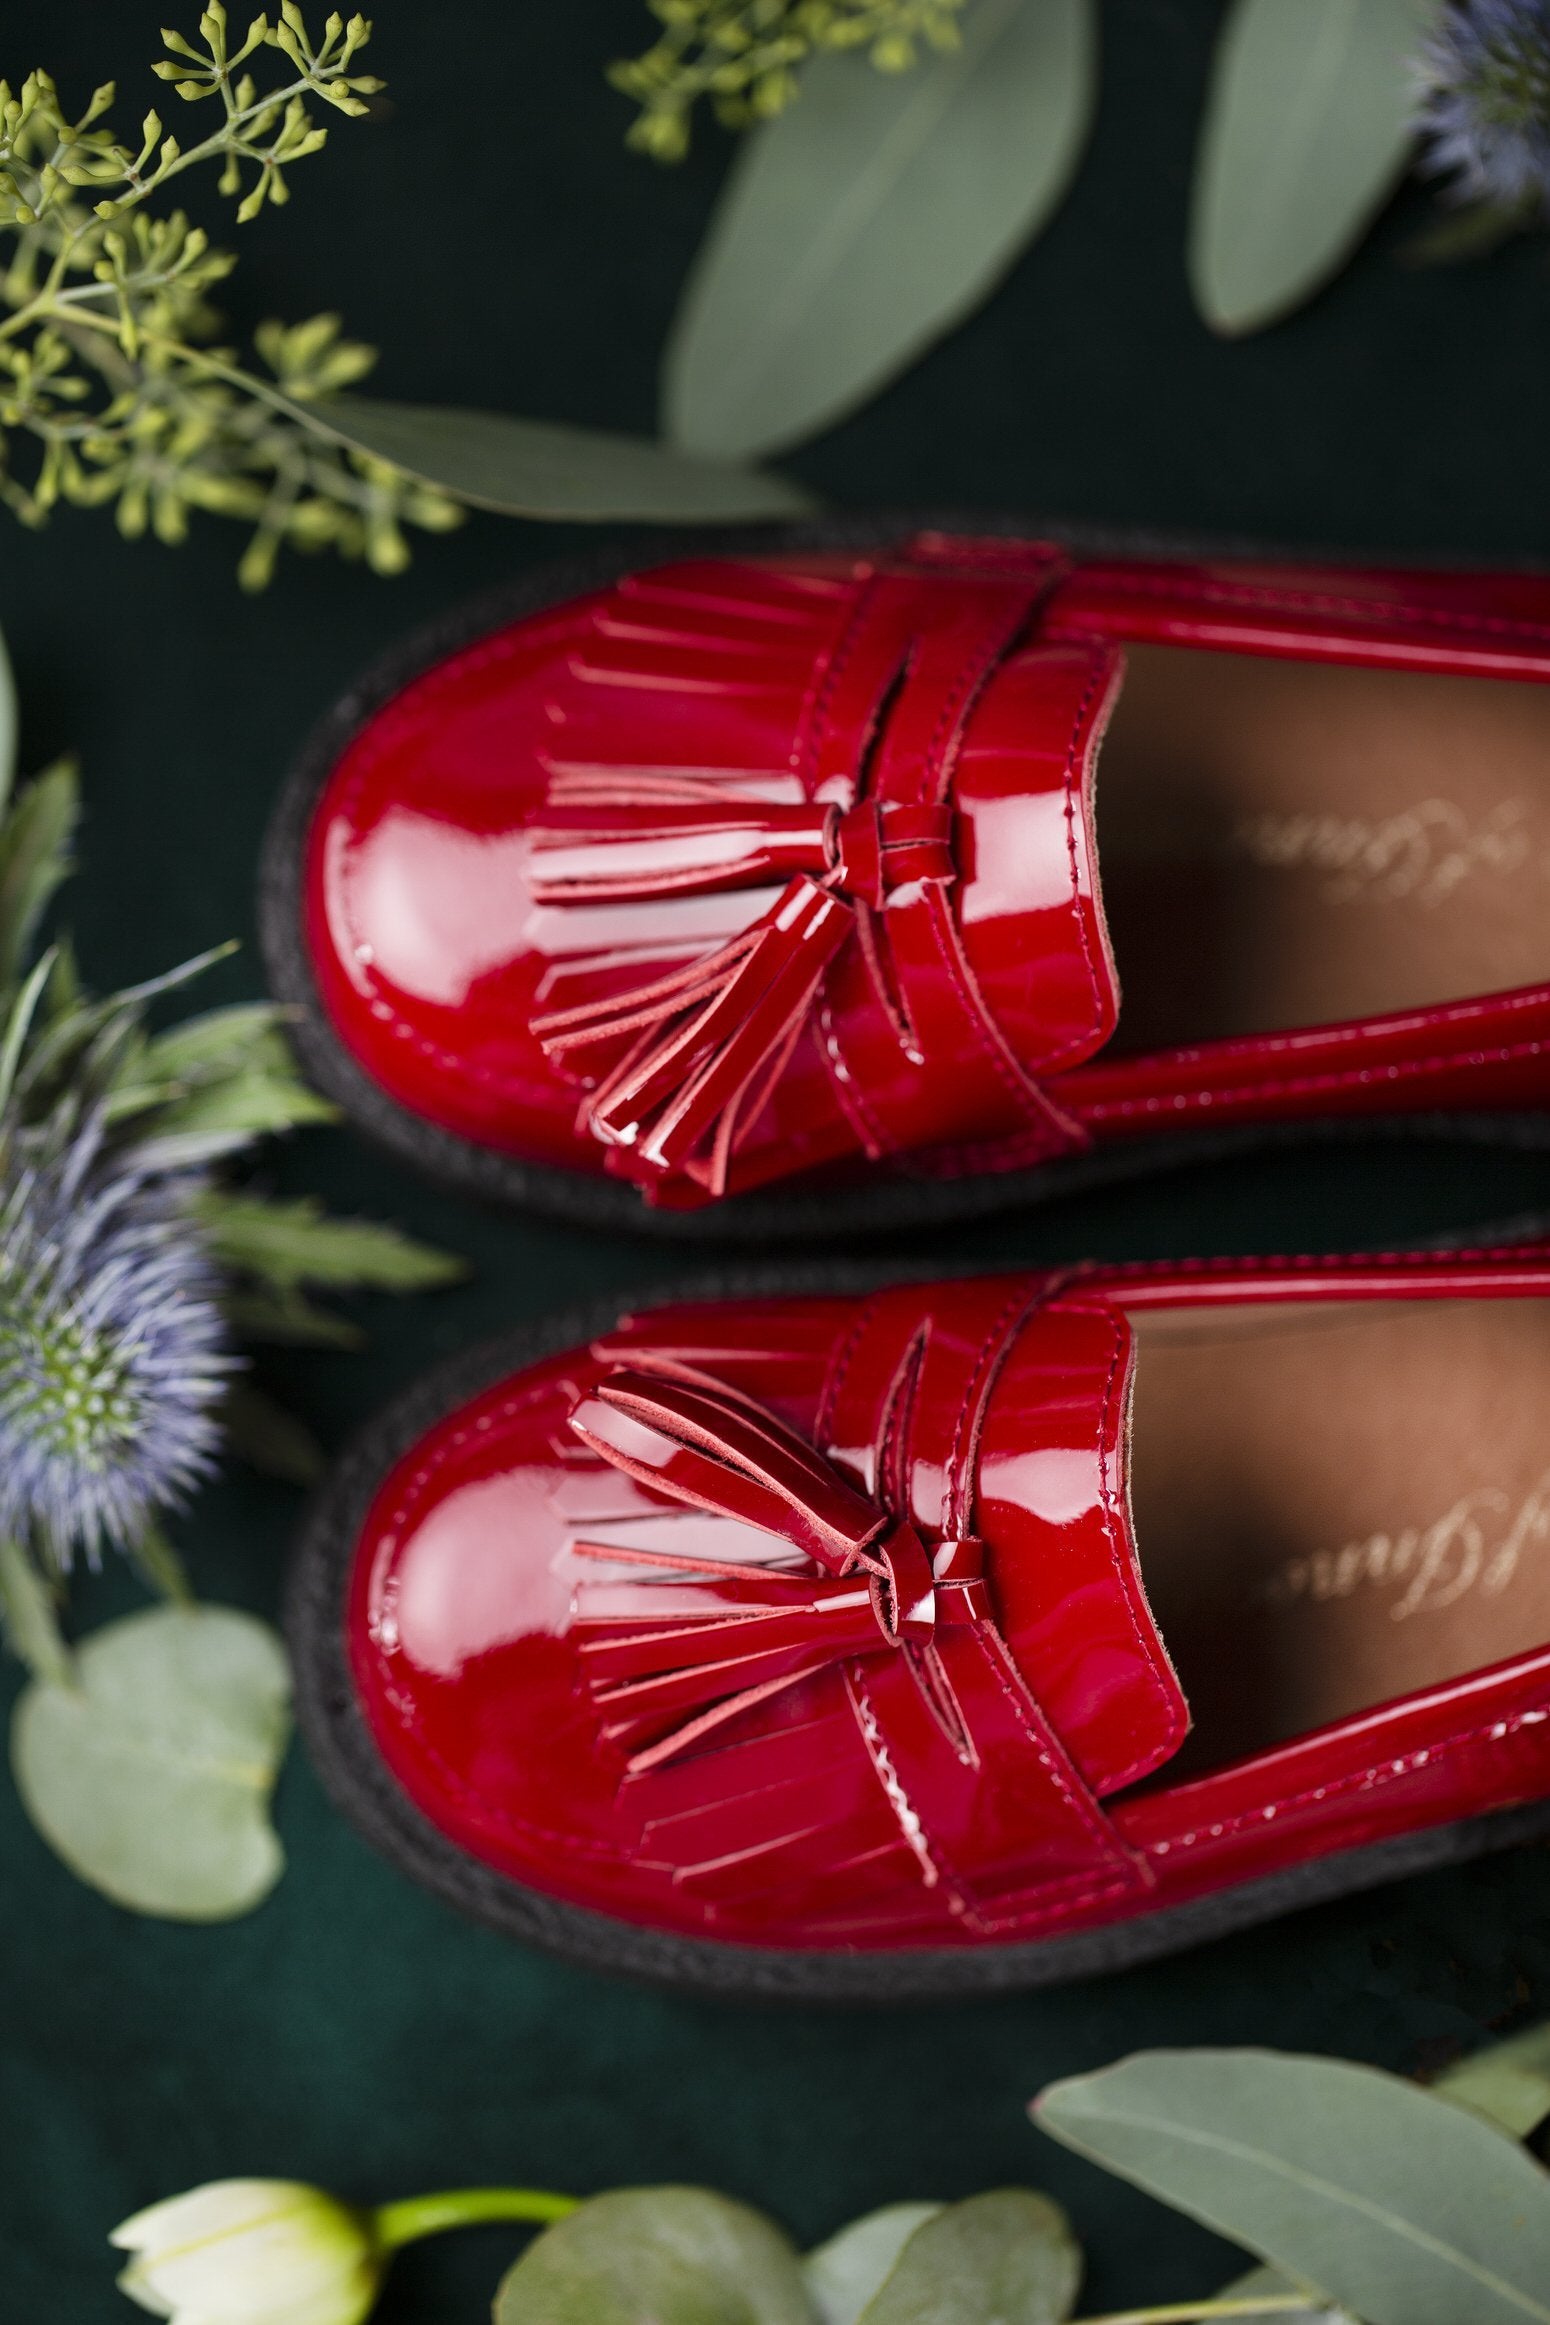 Vita Burgundy Loafers by Age of Innocence